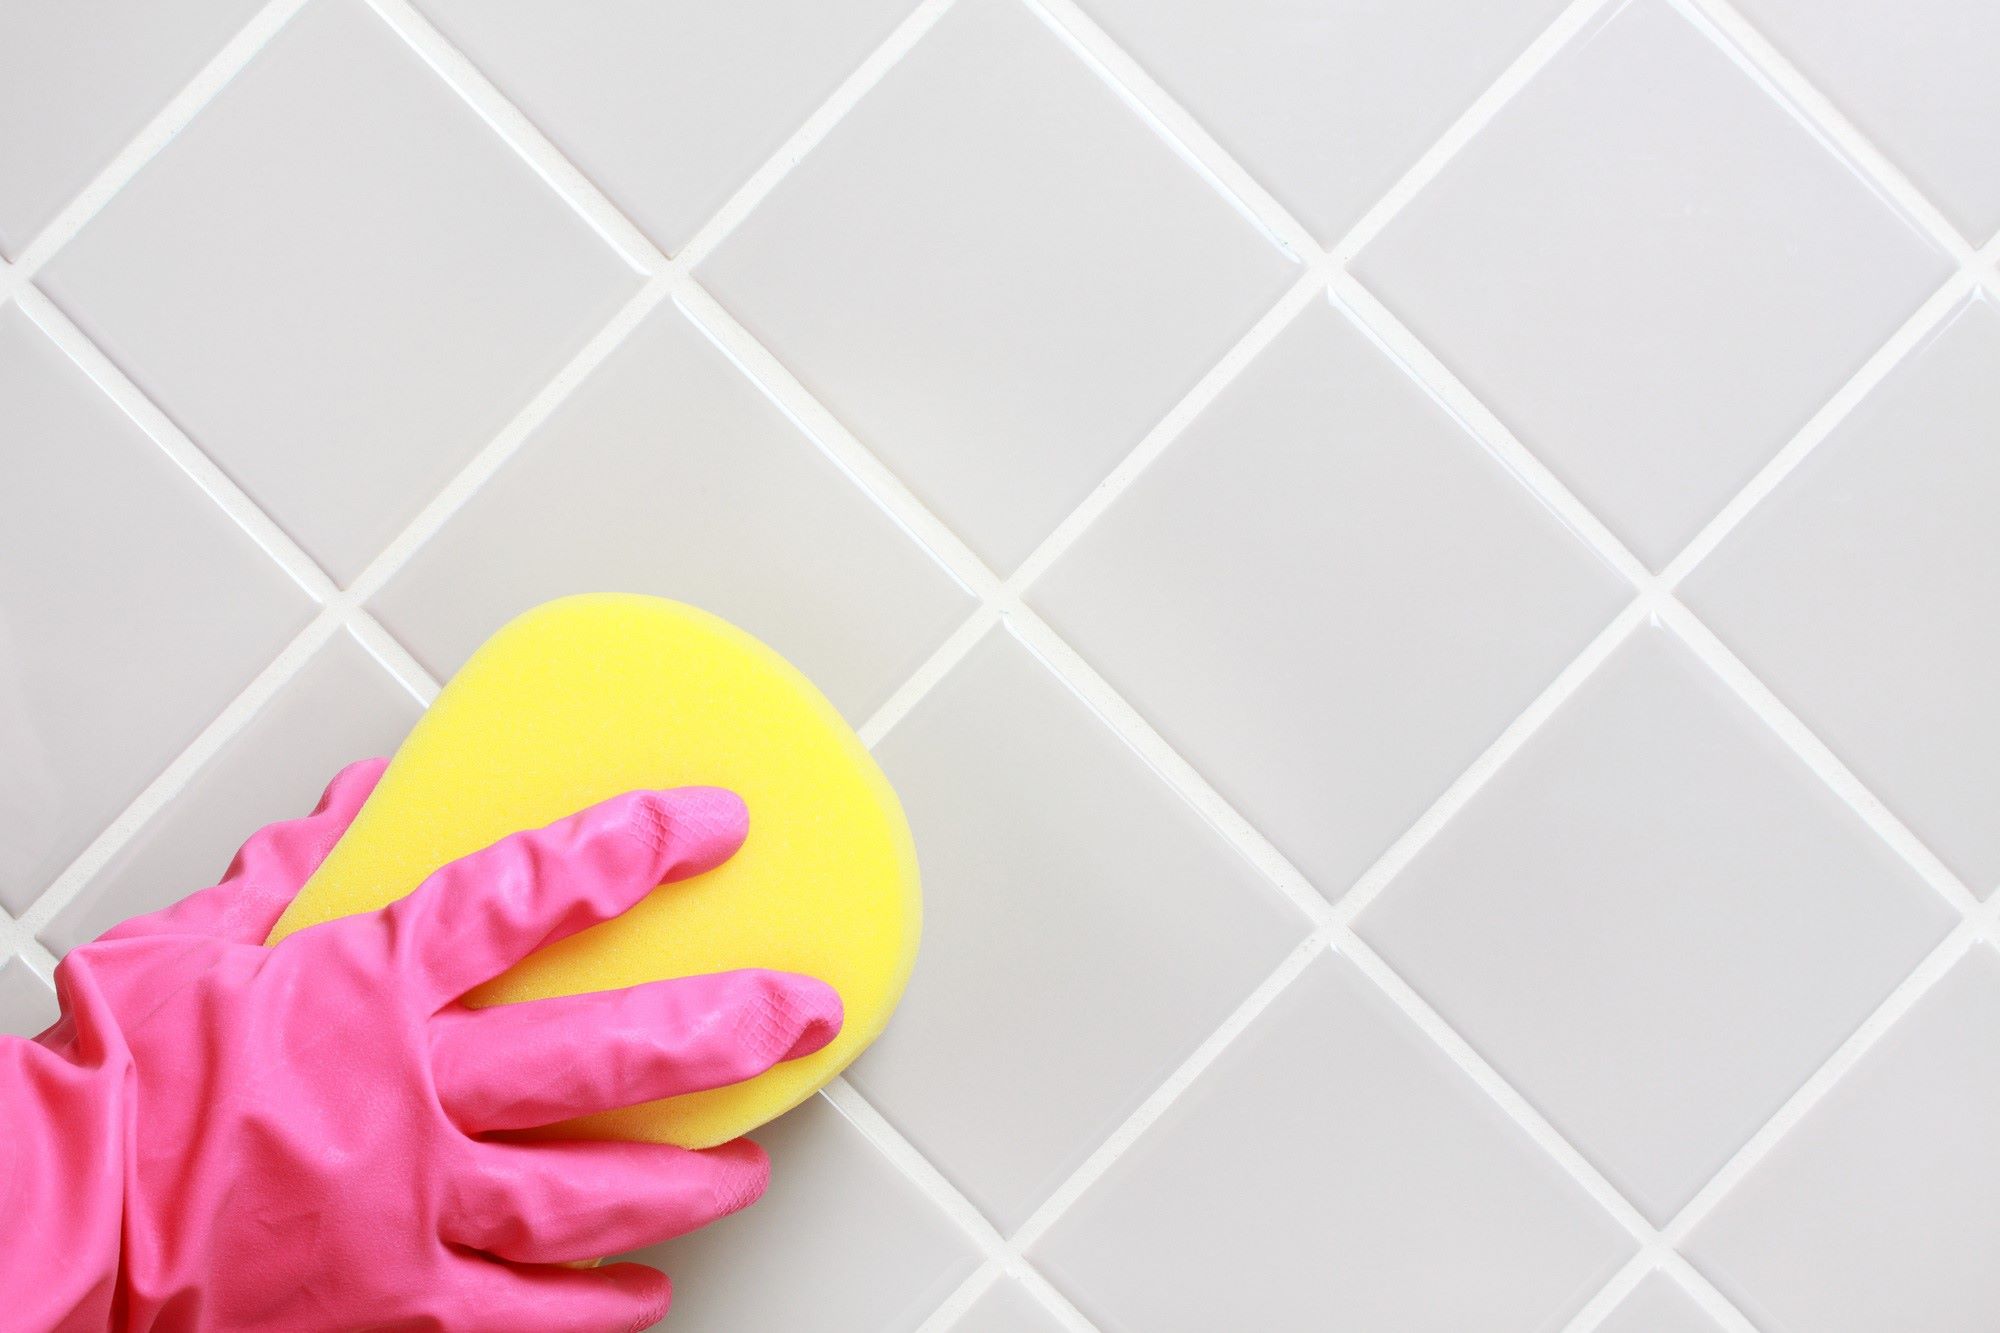 How To Seal Grout In Kitchen Backsplash